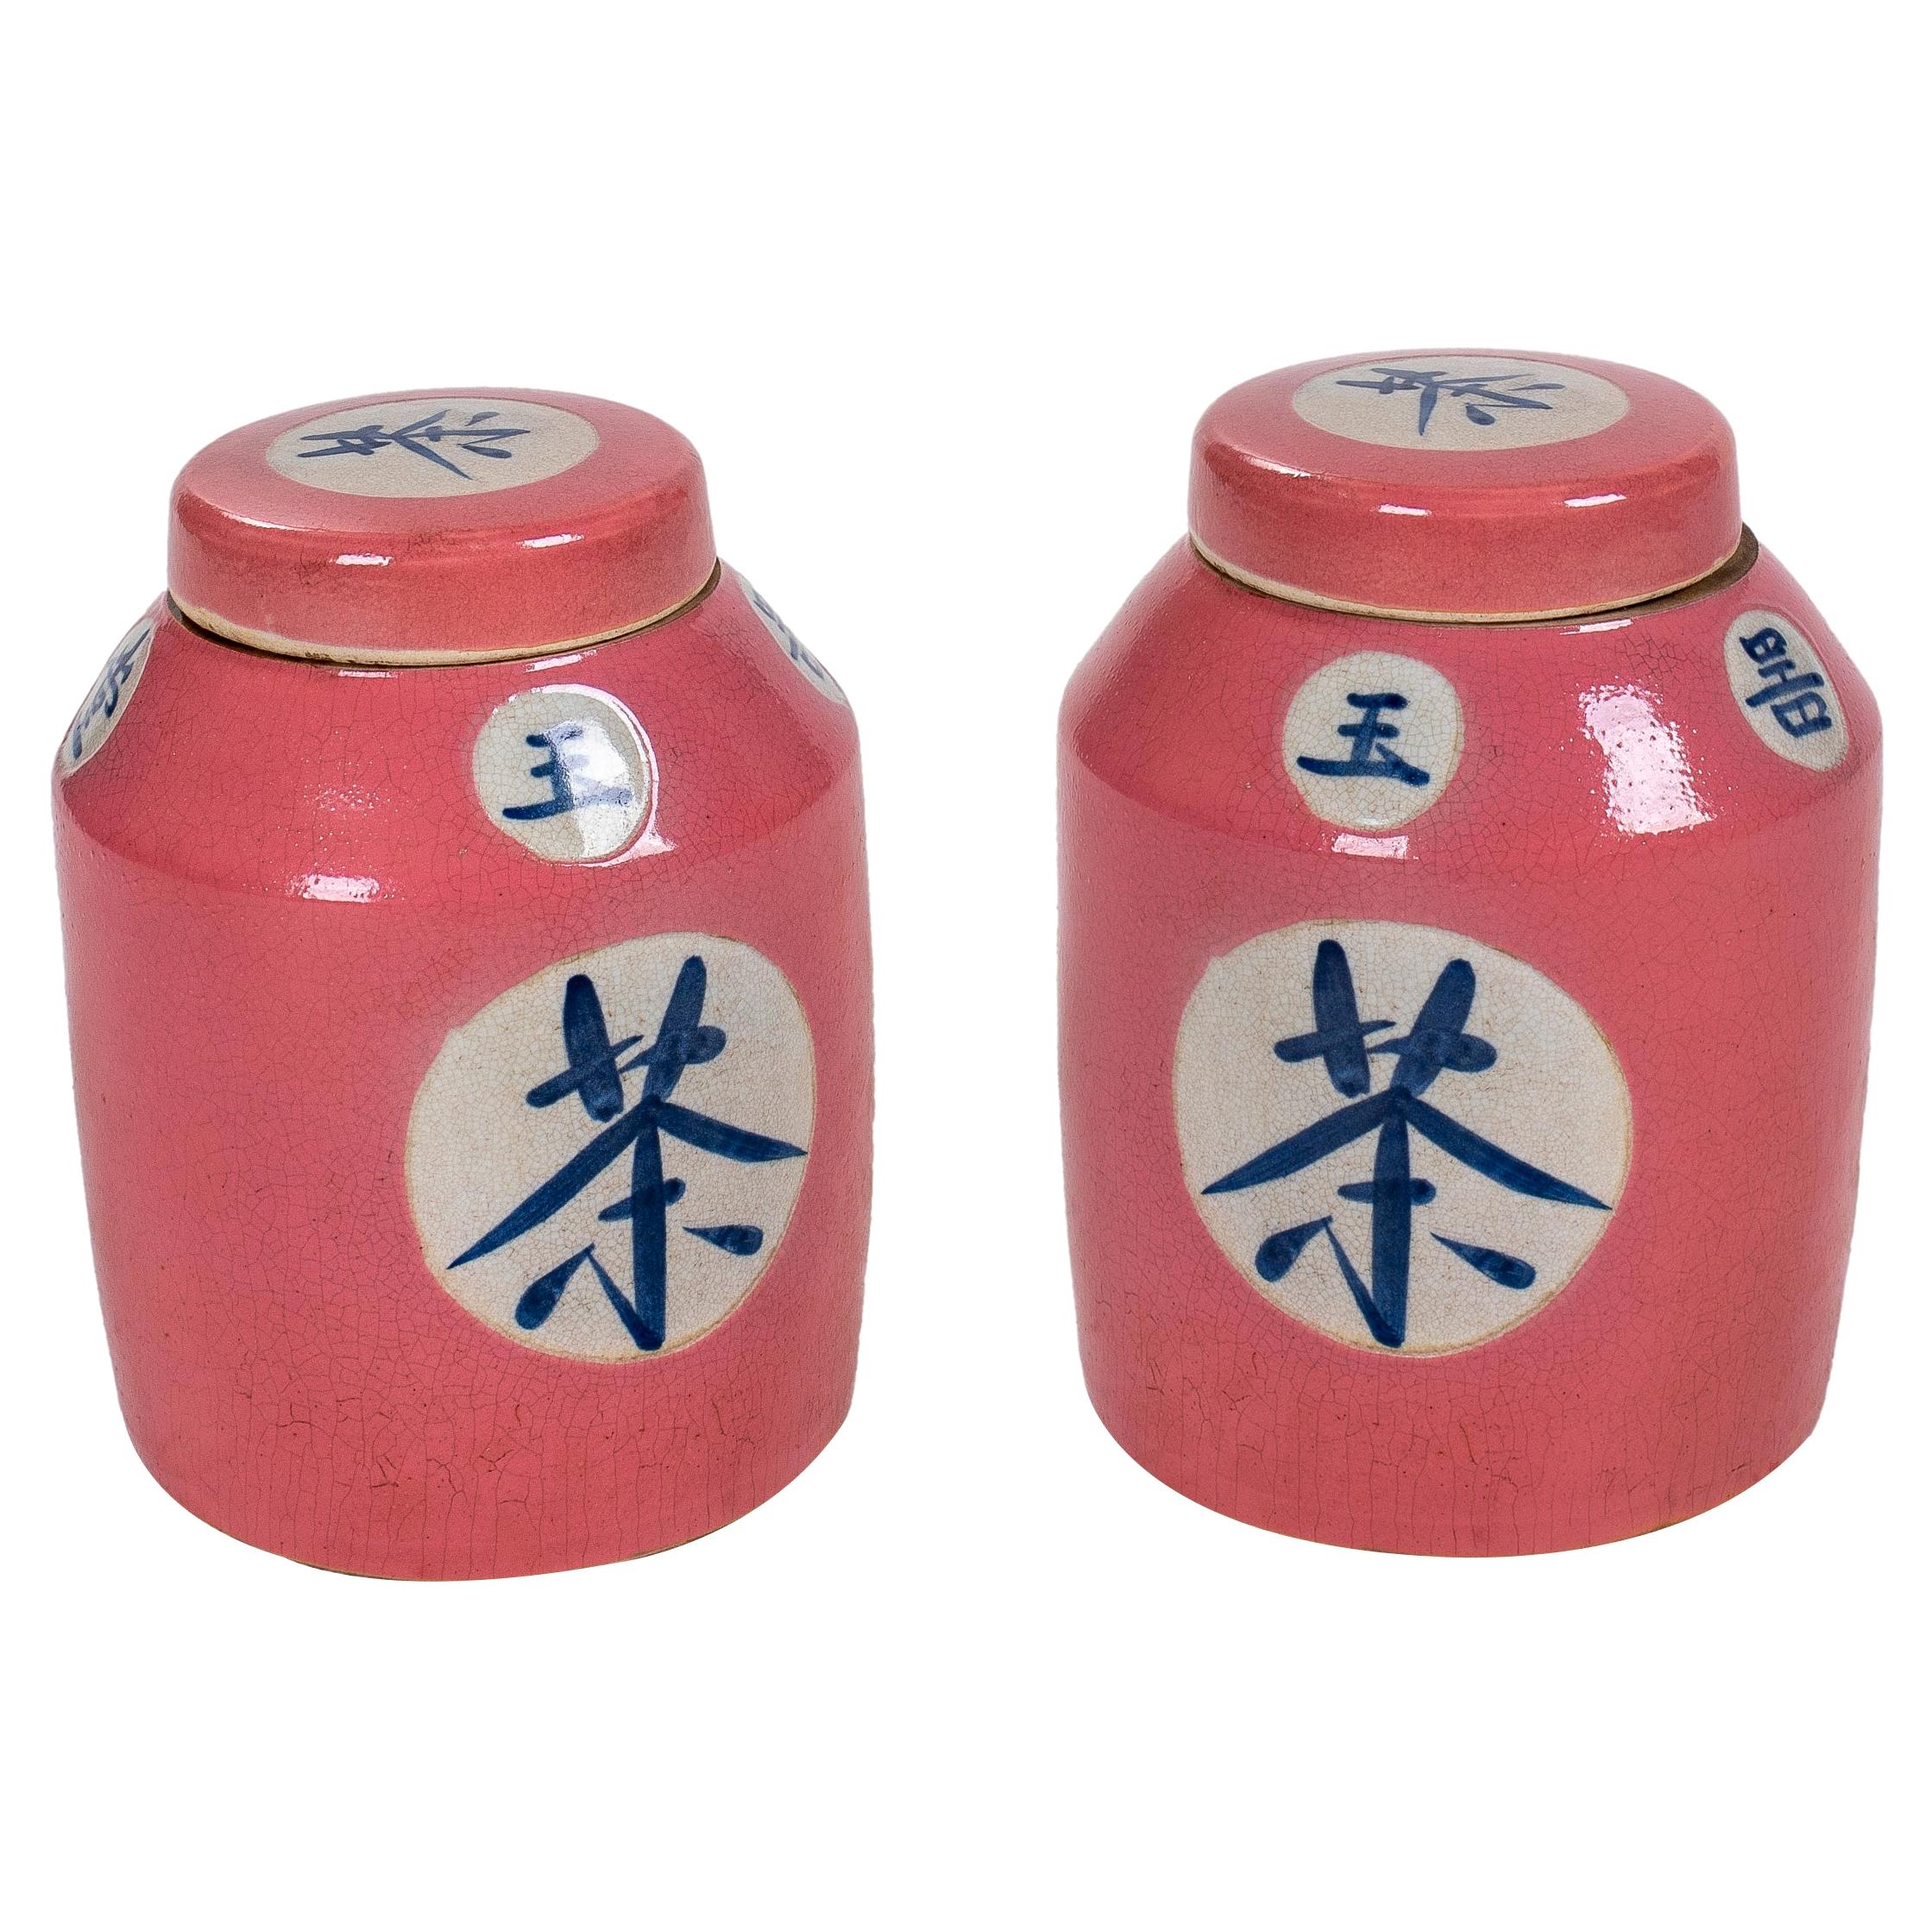 Pair of Asian Pink Glazed Porcelain Urns w/ Lids & Chinese Inscriptions